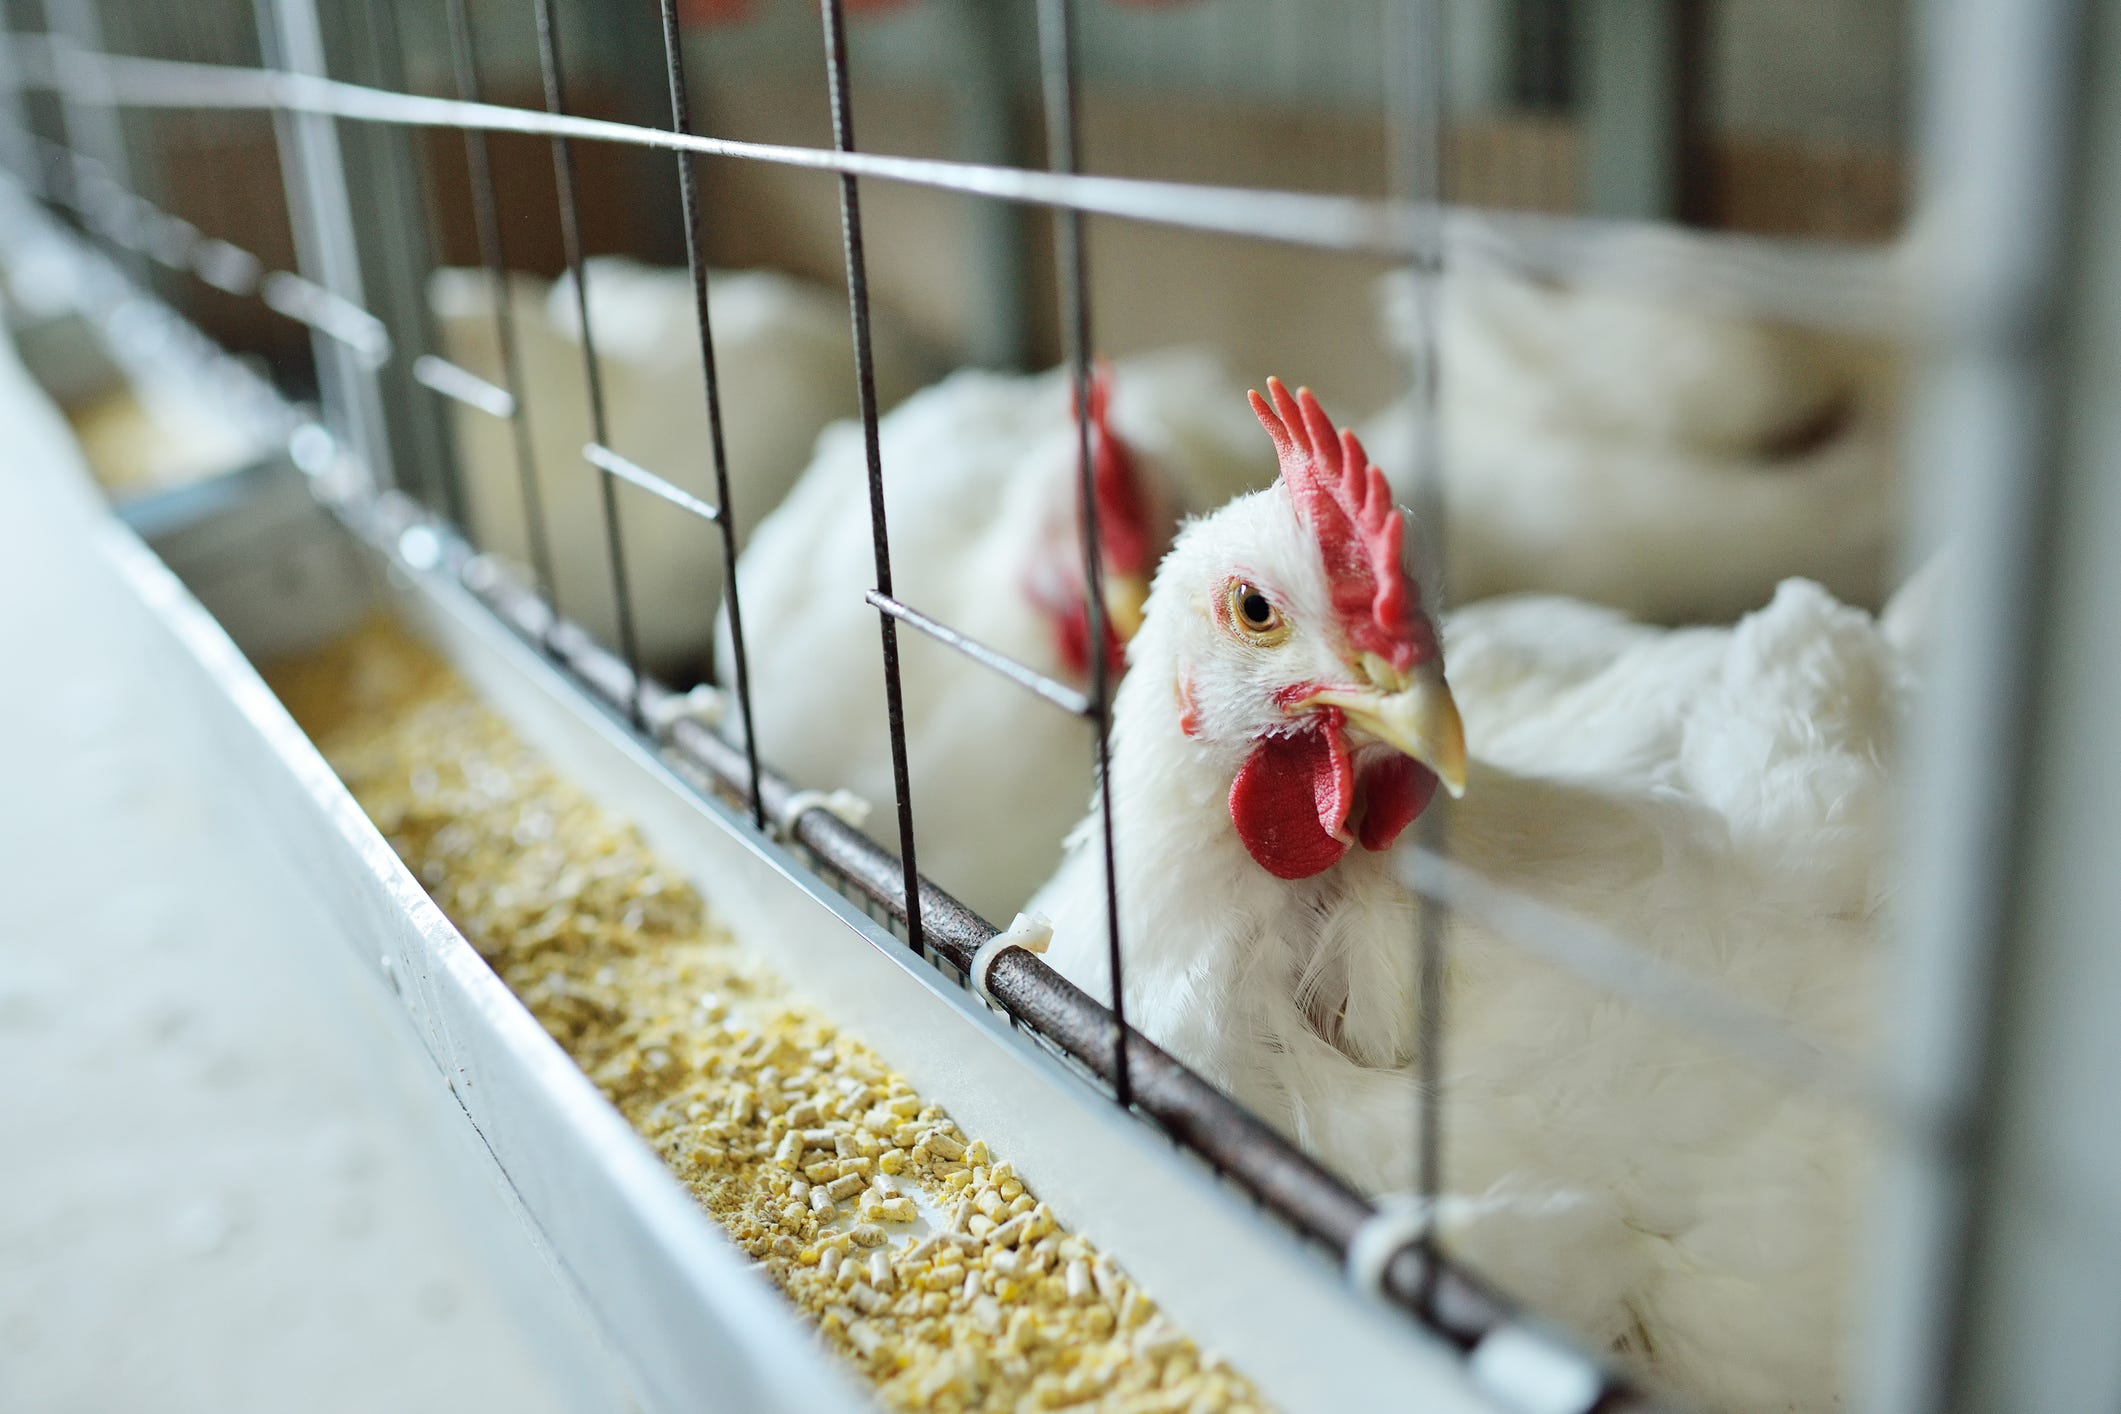 Bird flu outbreak is spilling over into mammals. What does that mean for humans?